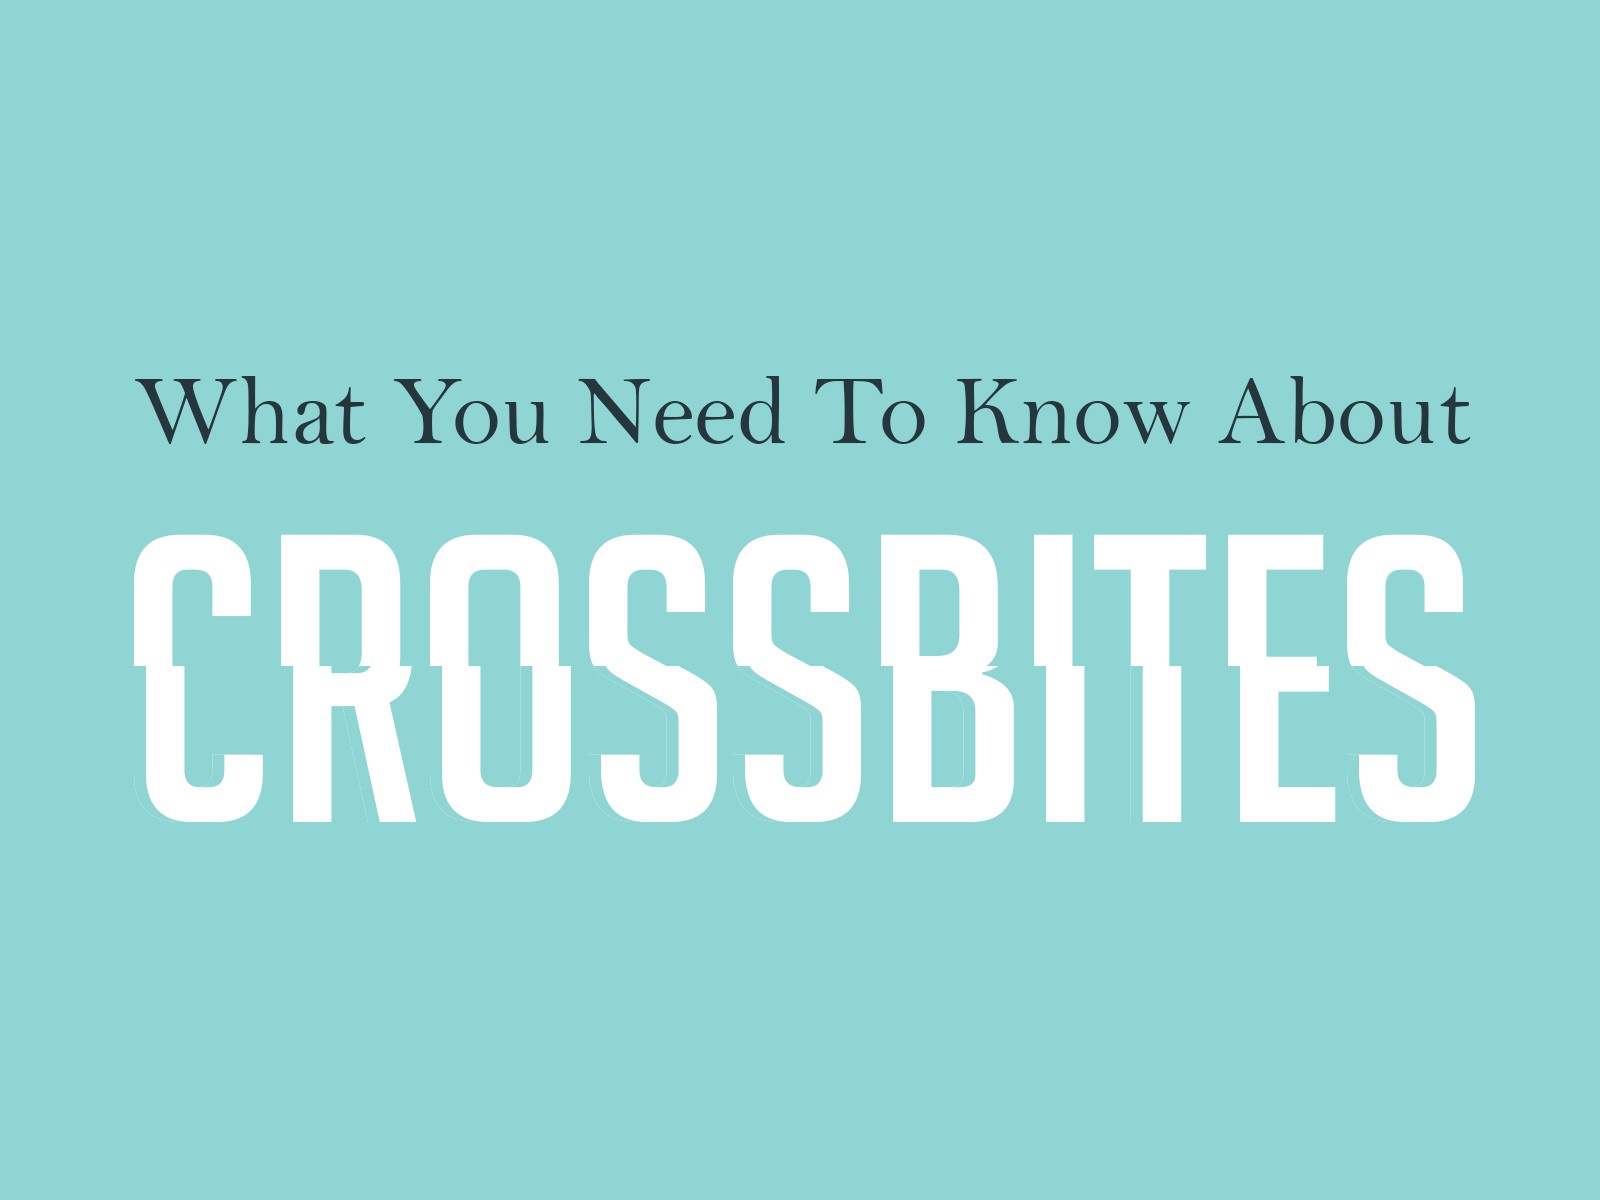 What You Need To Know About Crossbites